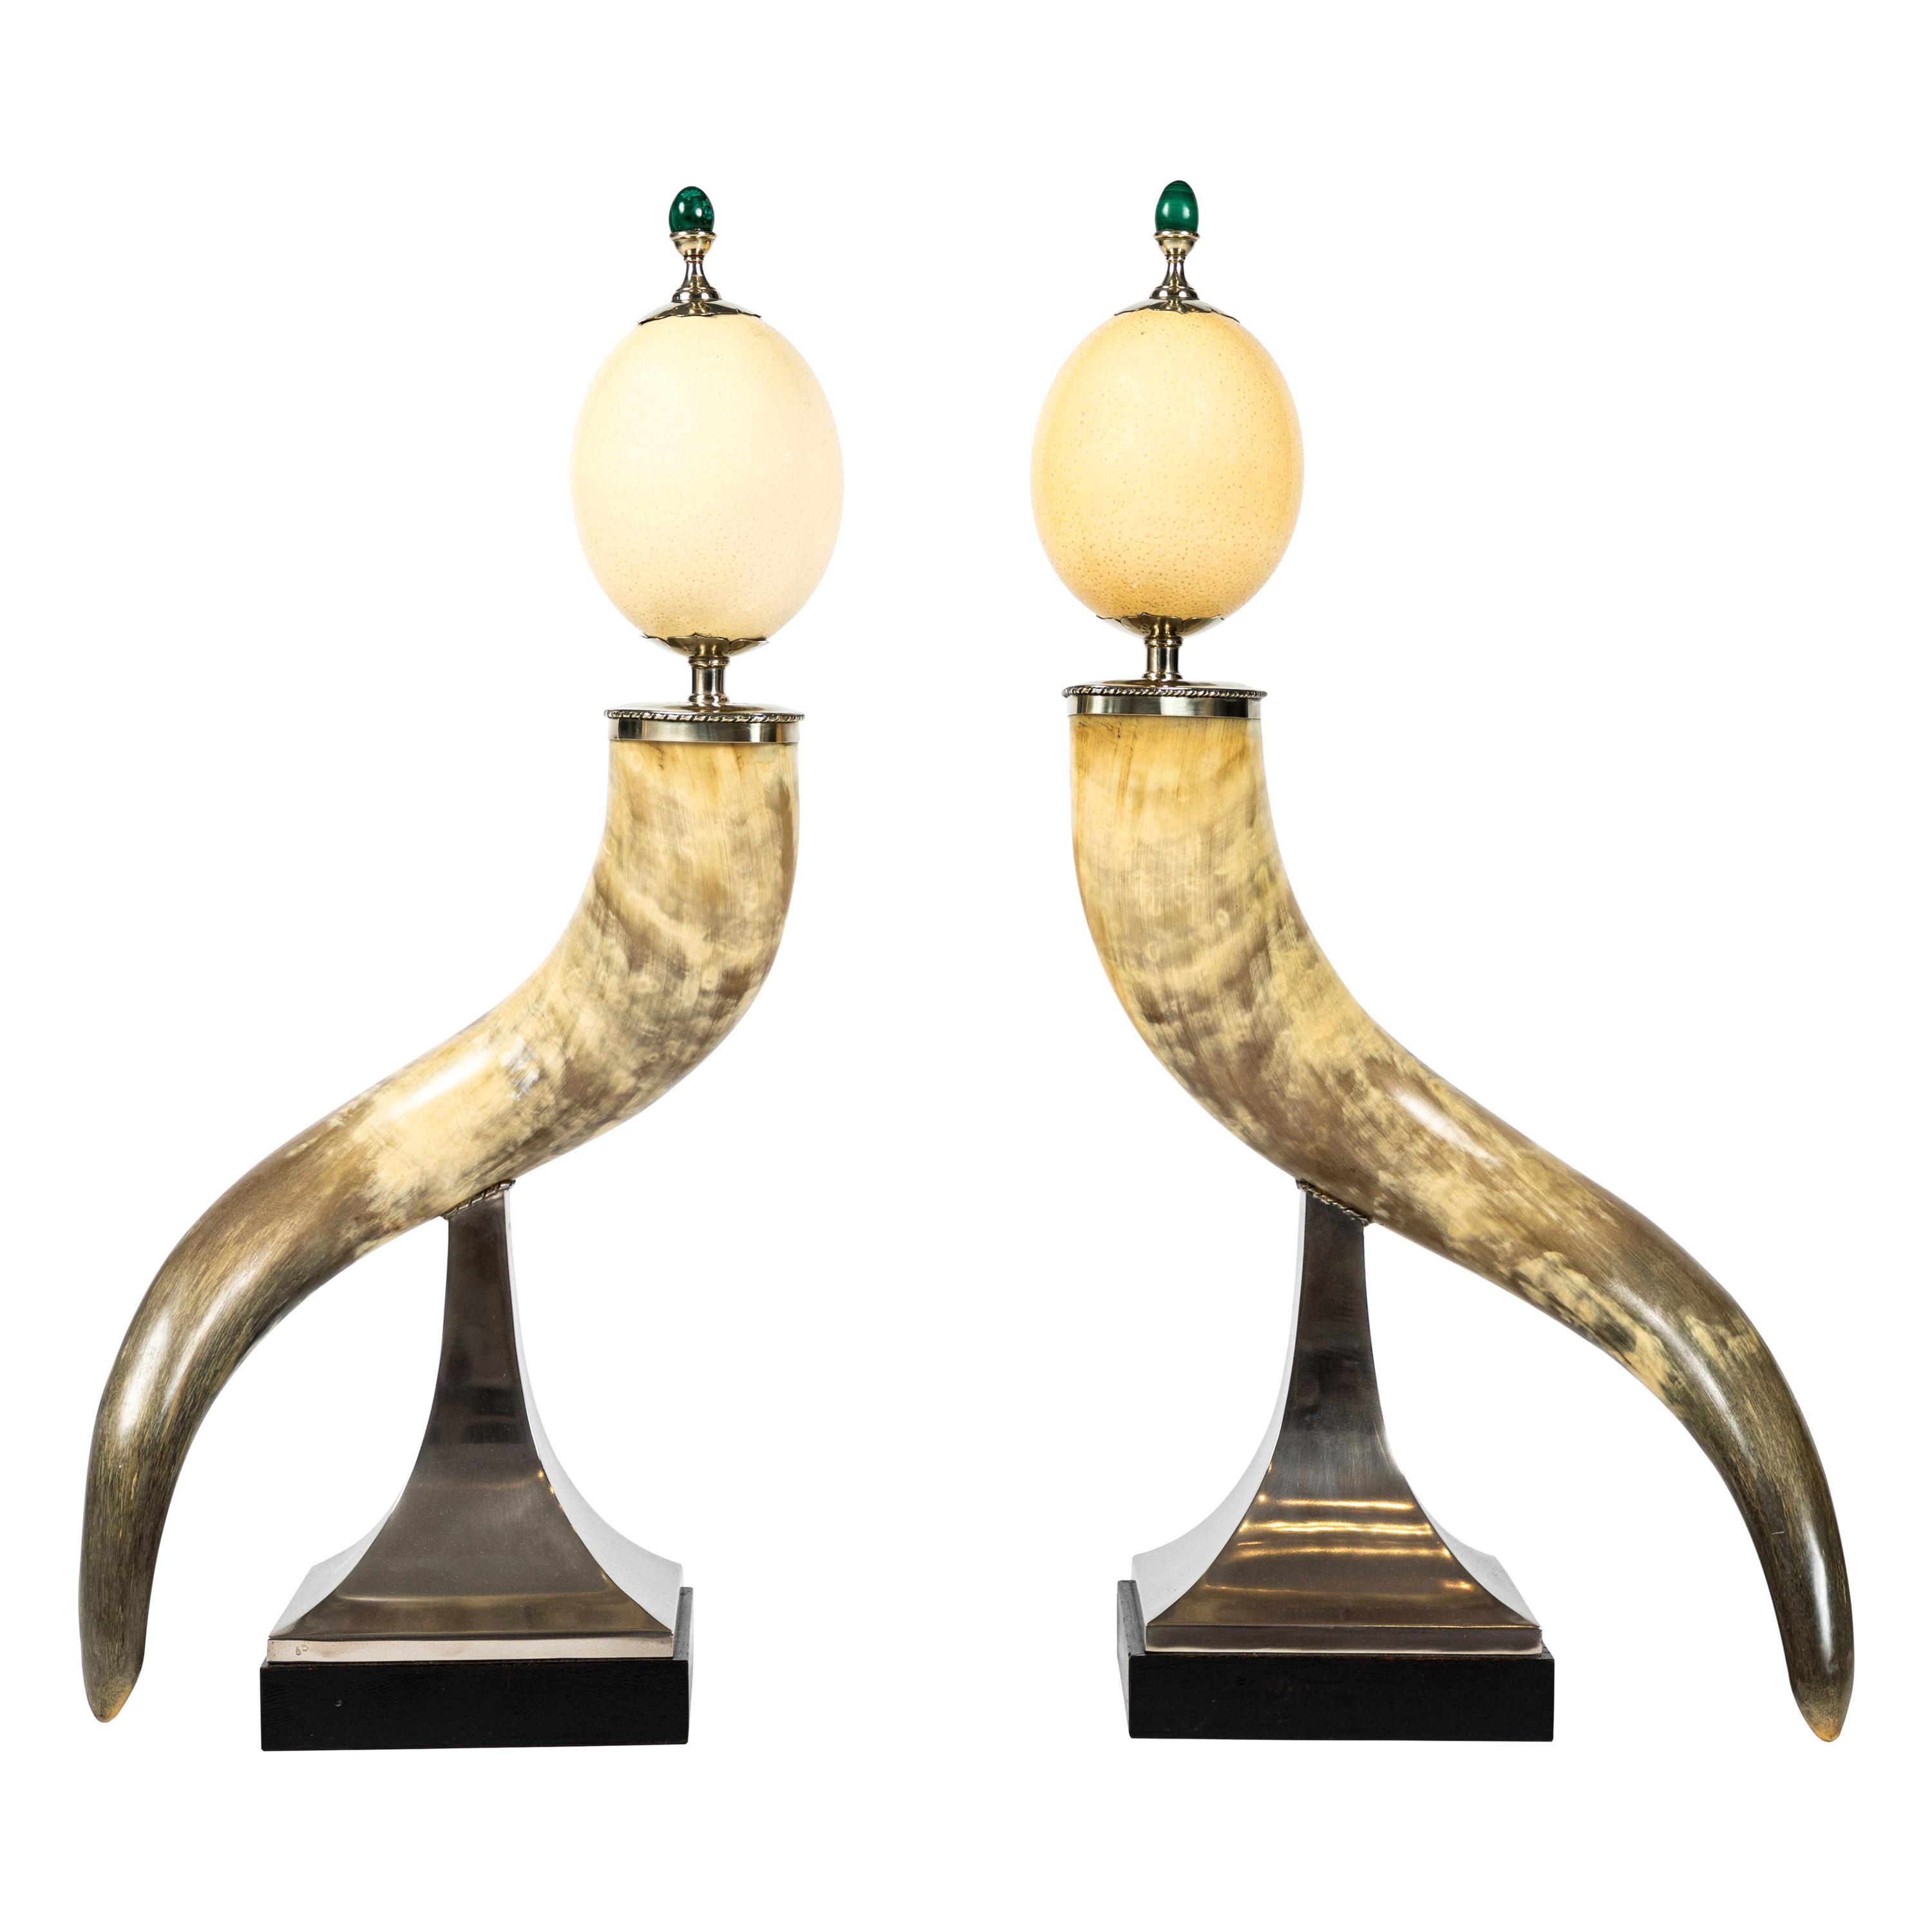 Pair of Decorative Horn and Ostrich Egg Garnitures by Antony Redmile